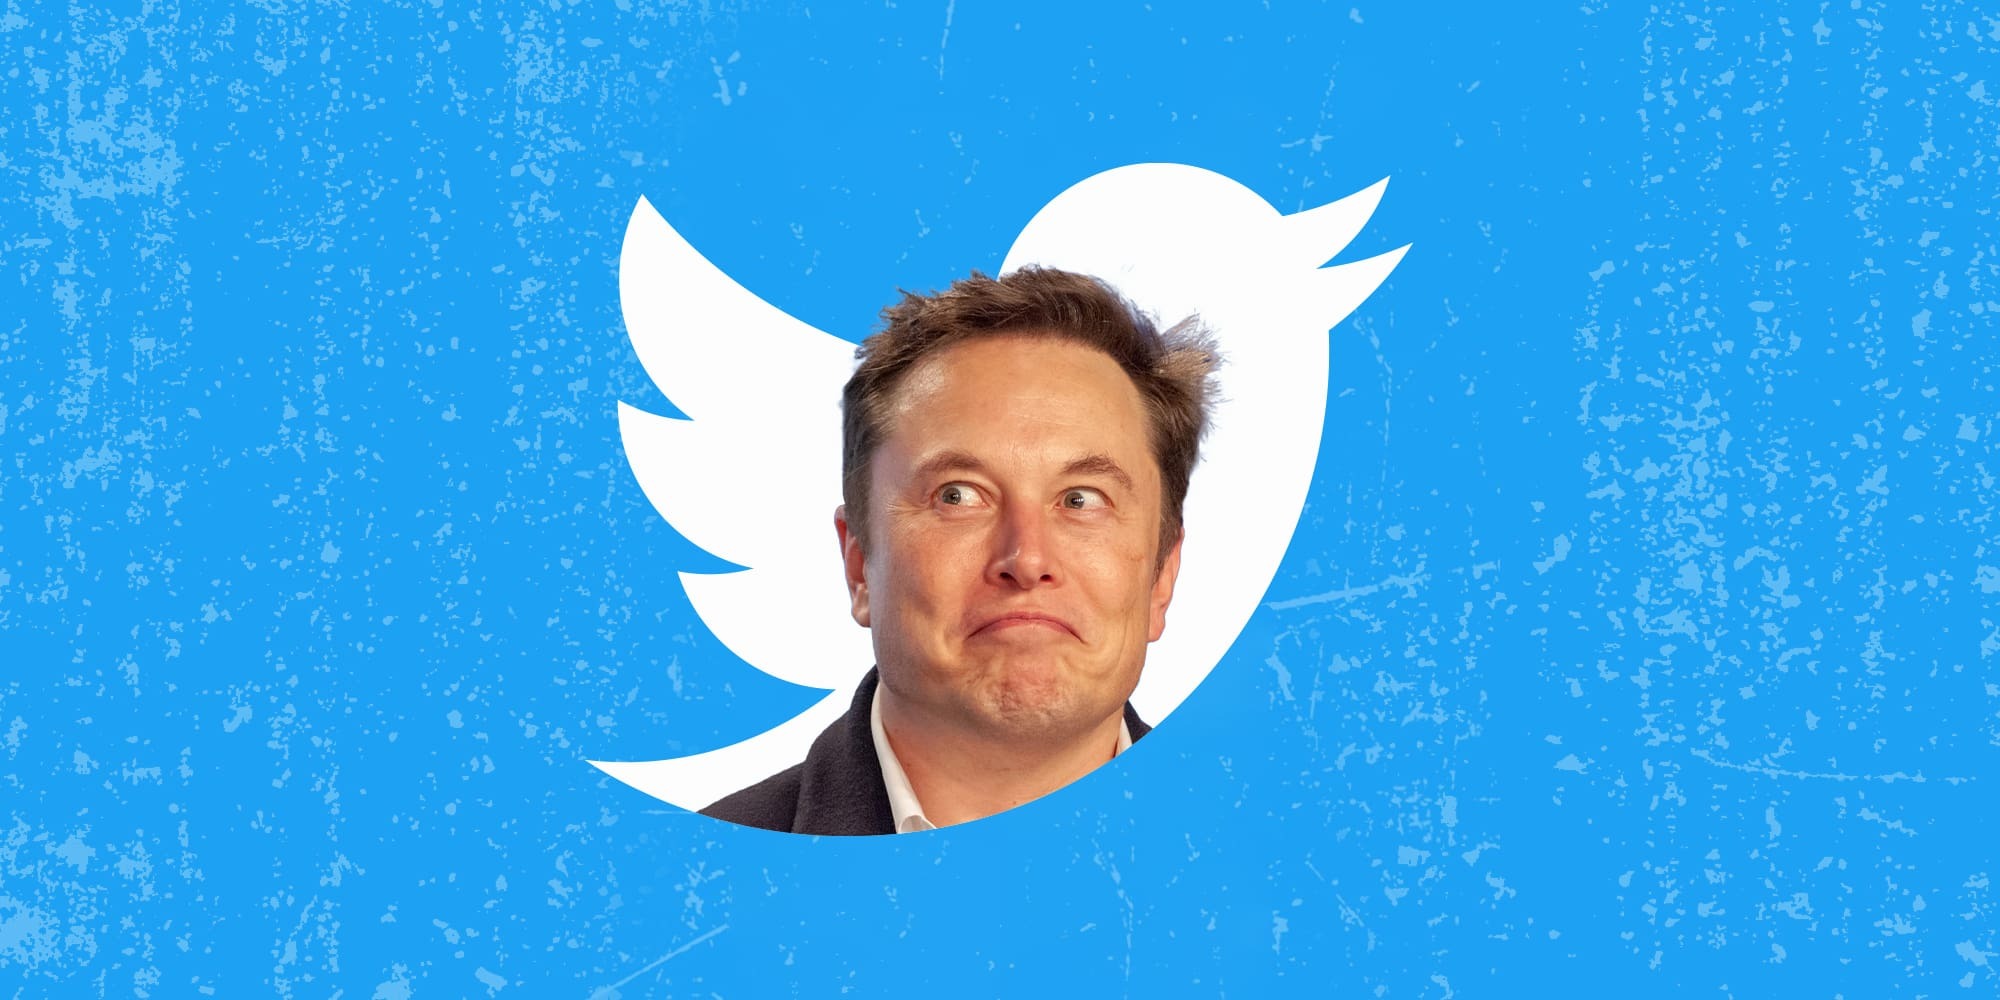 Elon Musk takes over as Twitter CEO and fires company executives